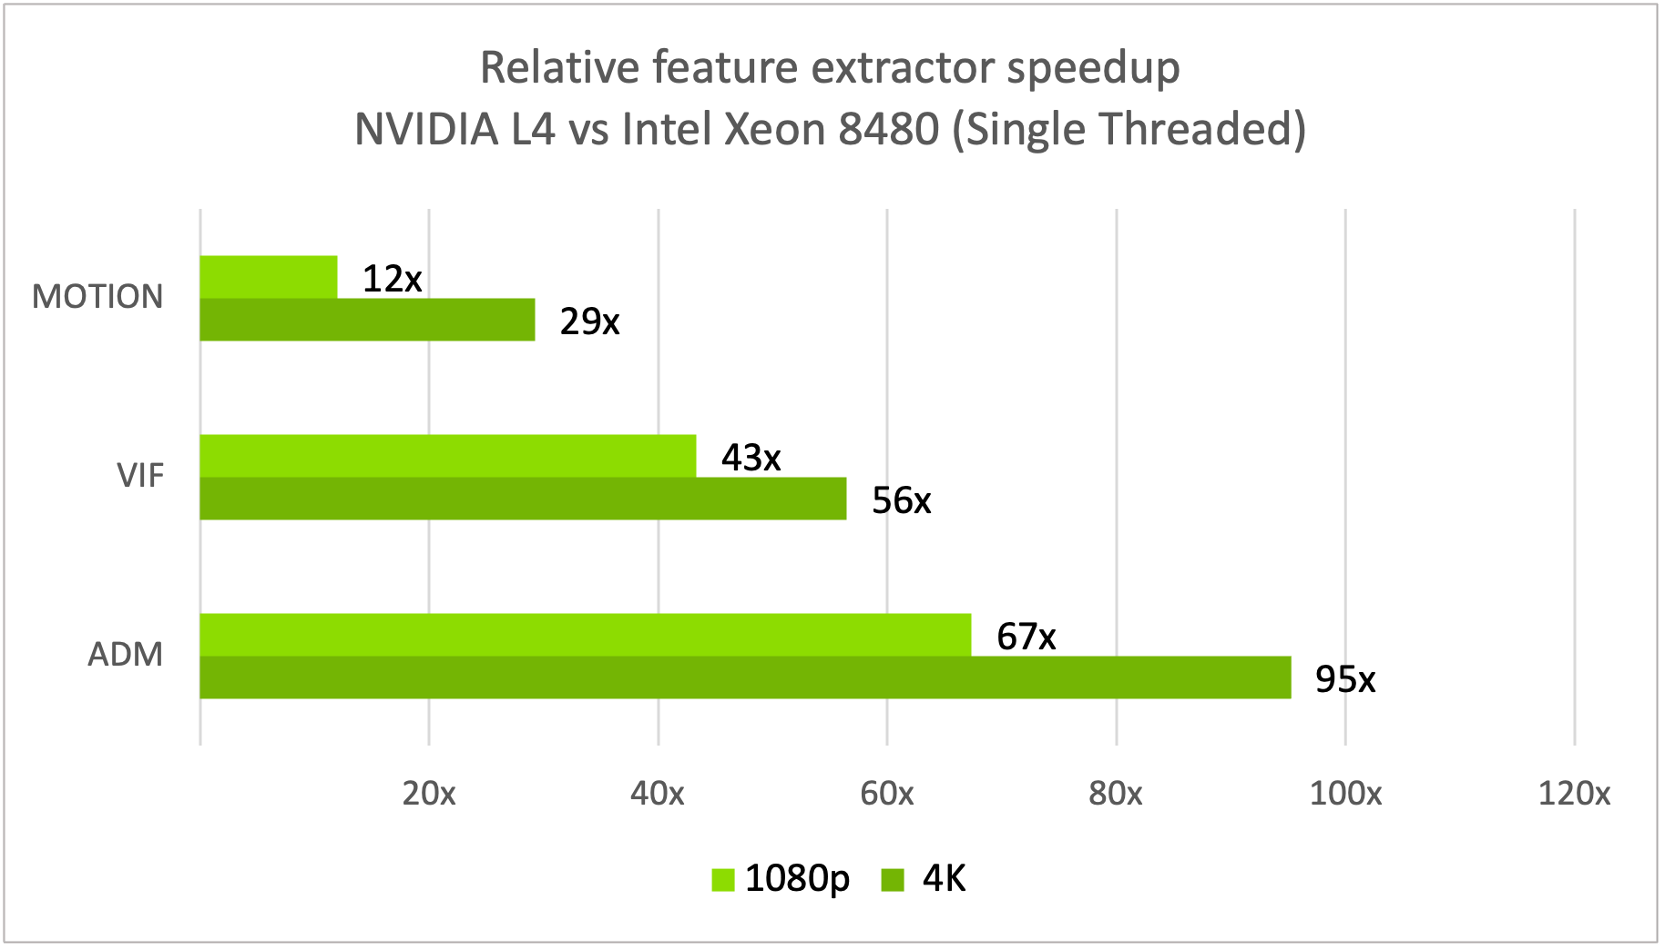 Chart comparing the relative feature extractor speedup NVIDIA L4 vs Dual Intel Xeon 8480.